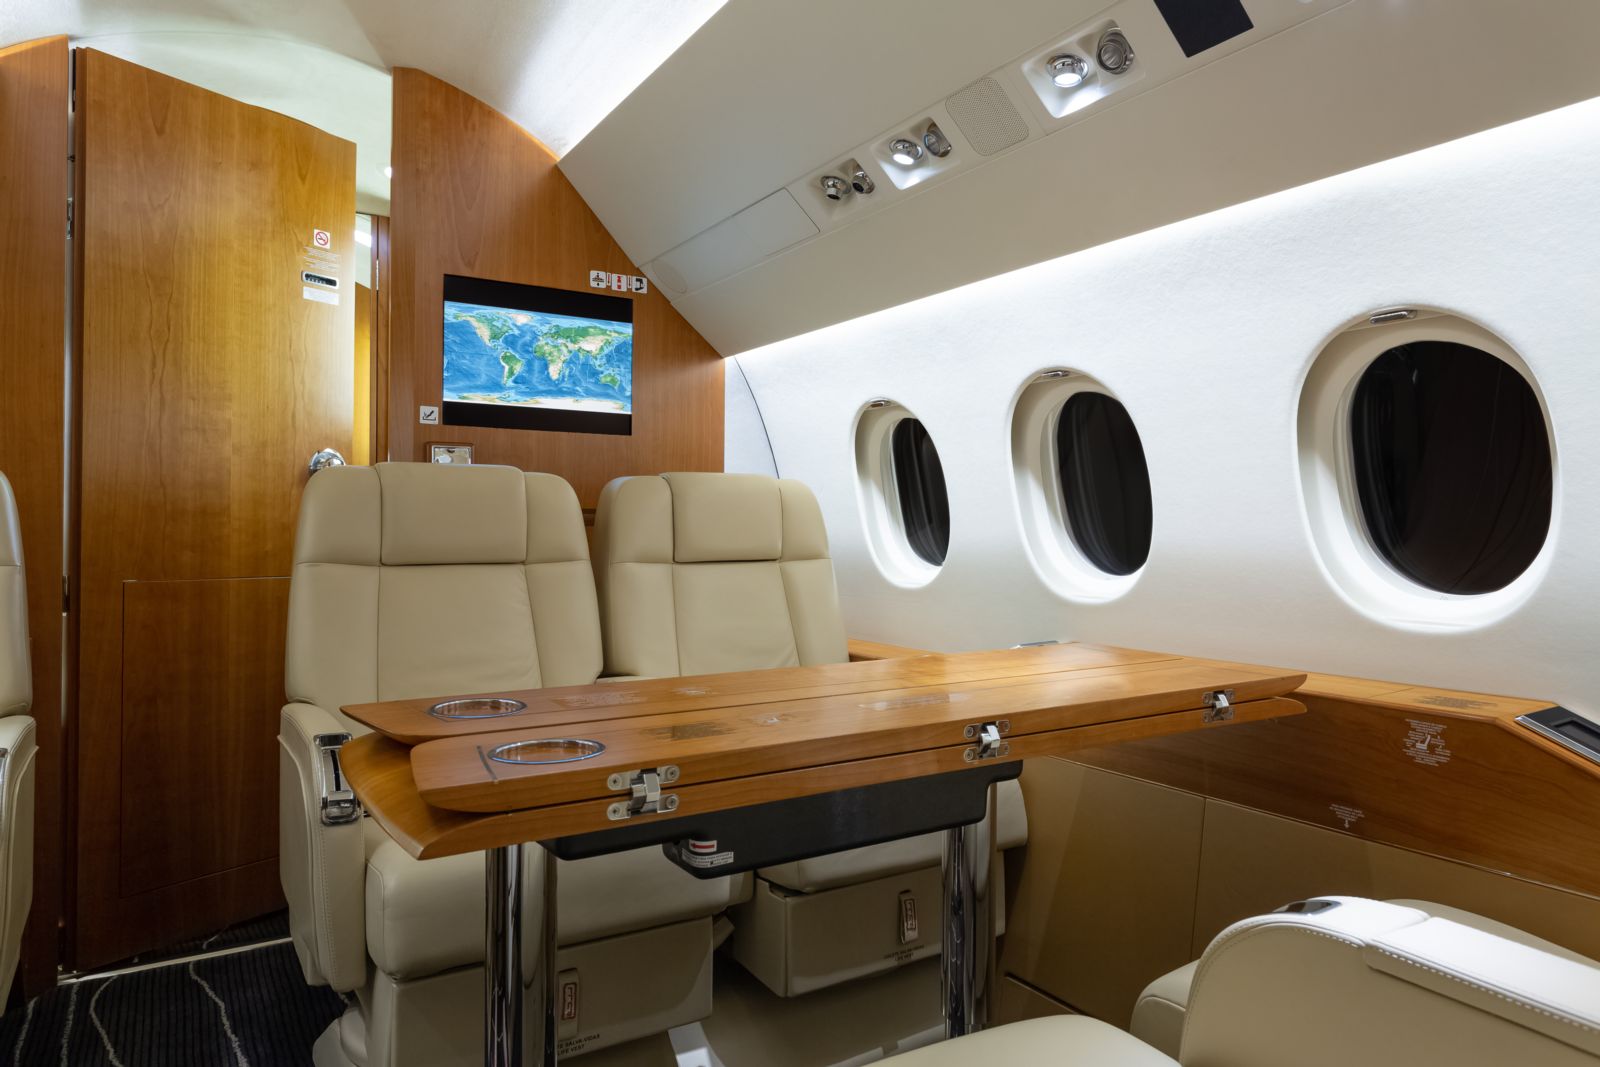 Dassault Falcon 2000LX  S/N 202 for sale | gallery image: /userfiles/files/bfp_3970.jpg